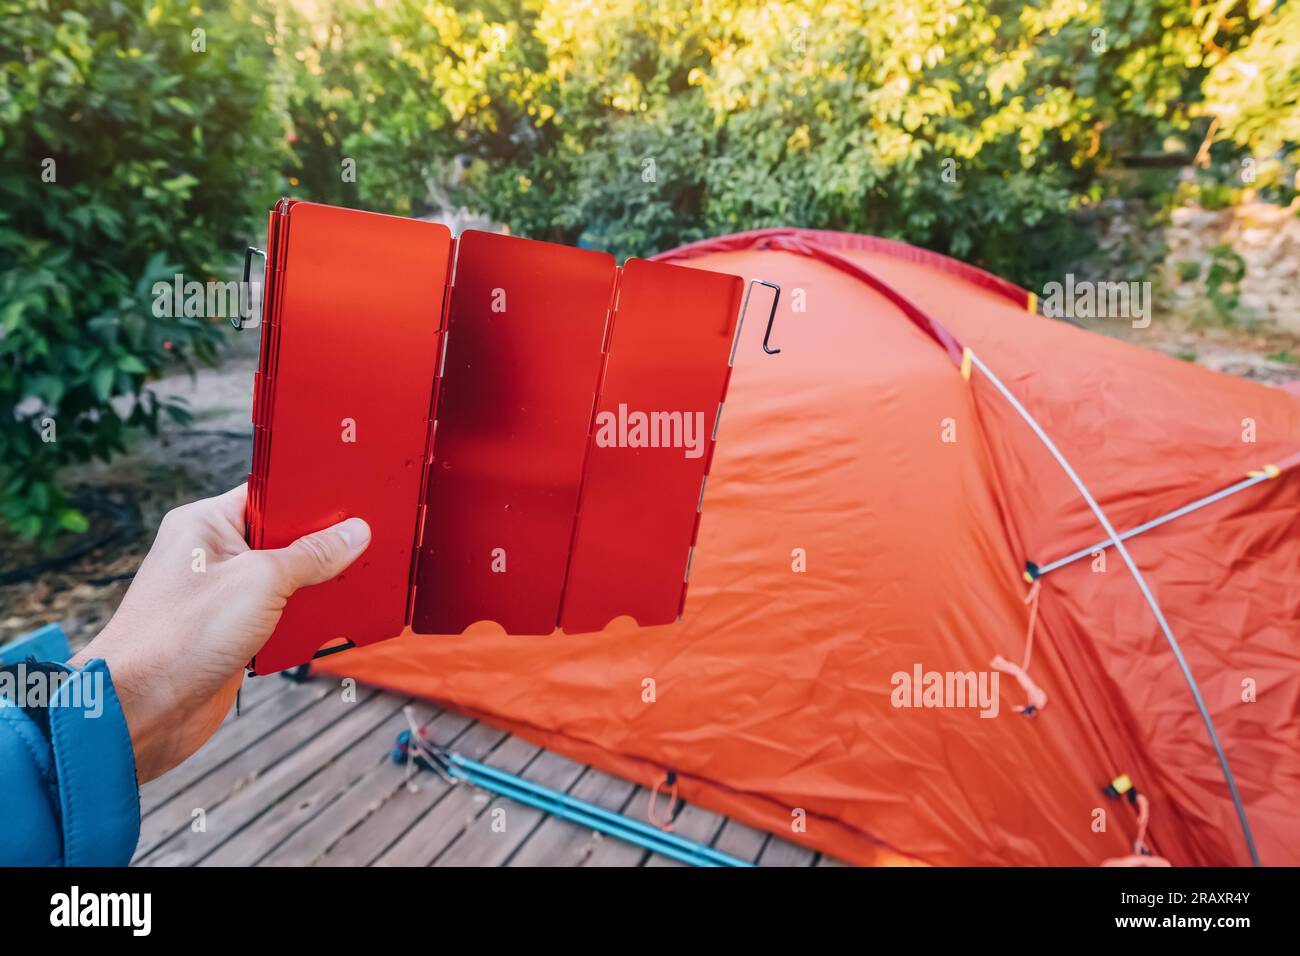 Assembling and installing a tent in a camping. Wind shield for burner in hand. Equipment and materials for hiking Stock Photo